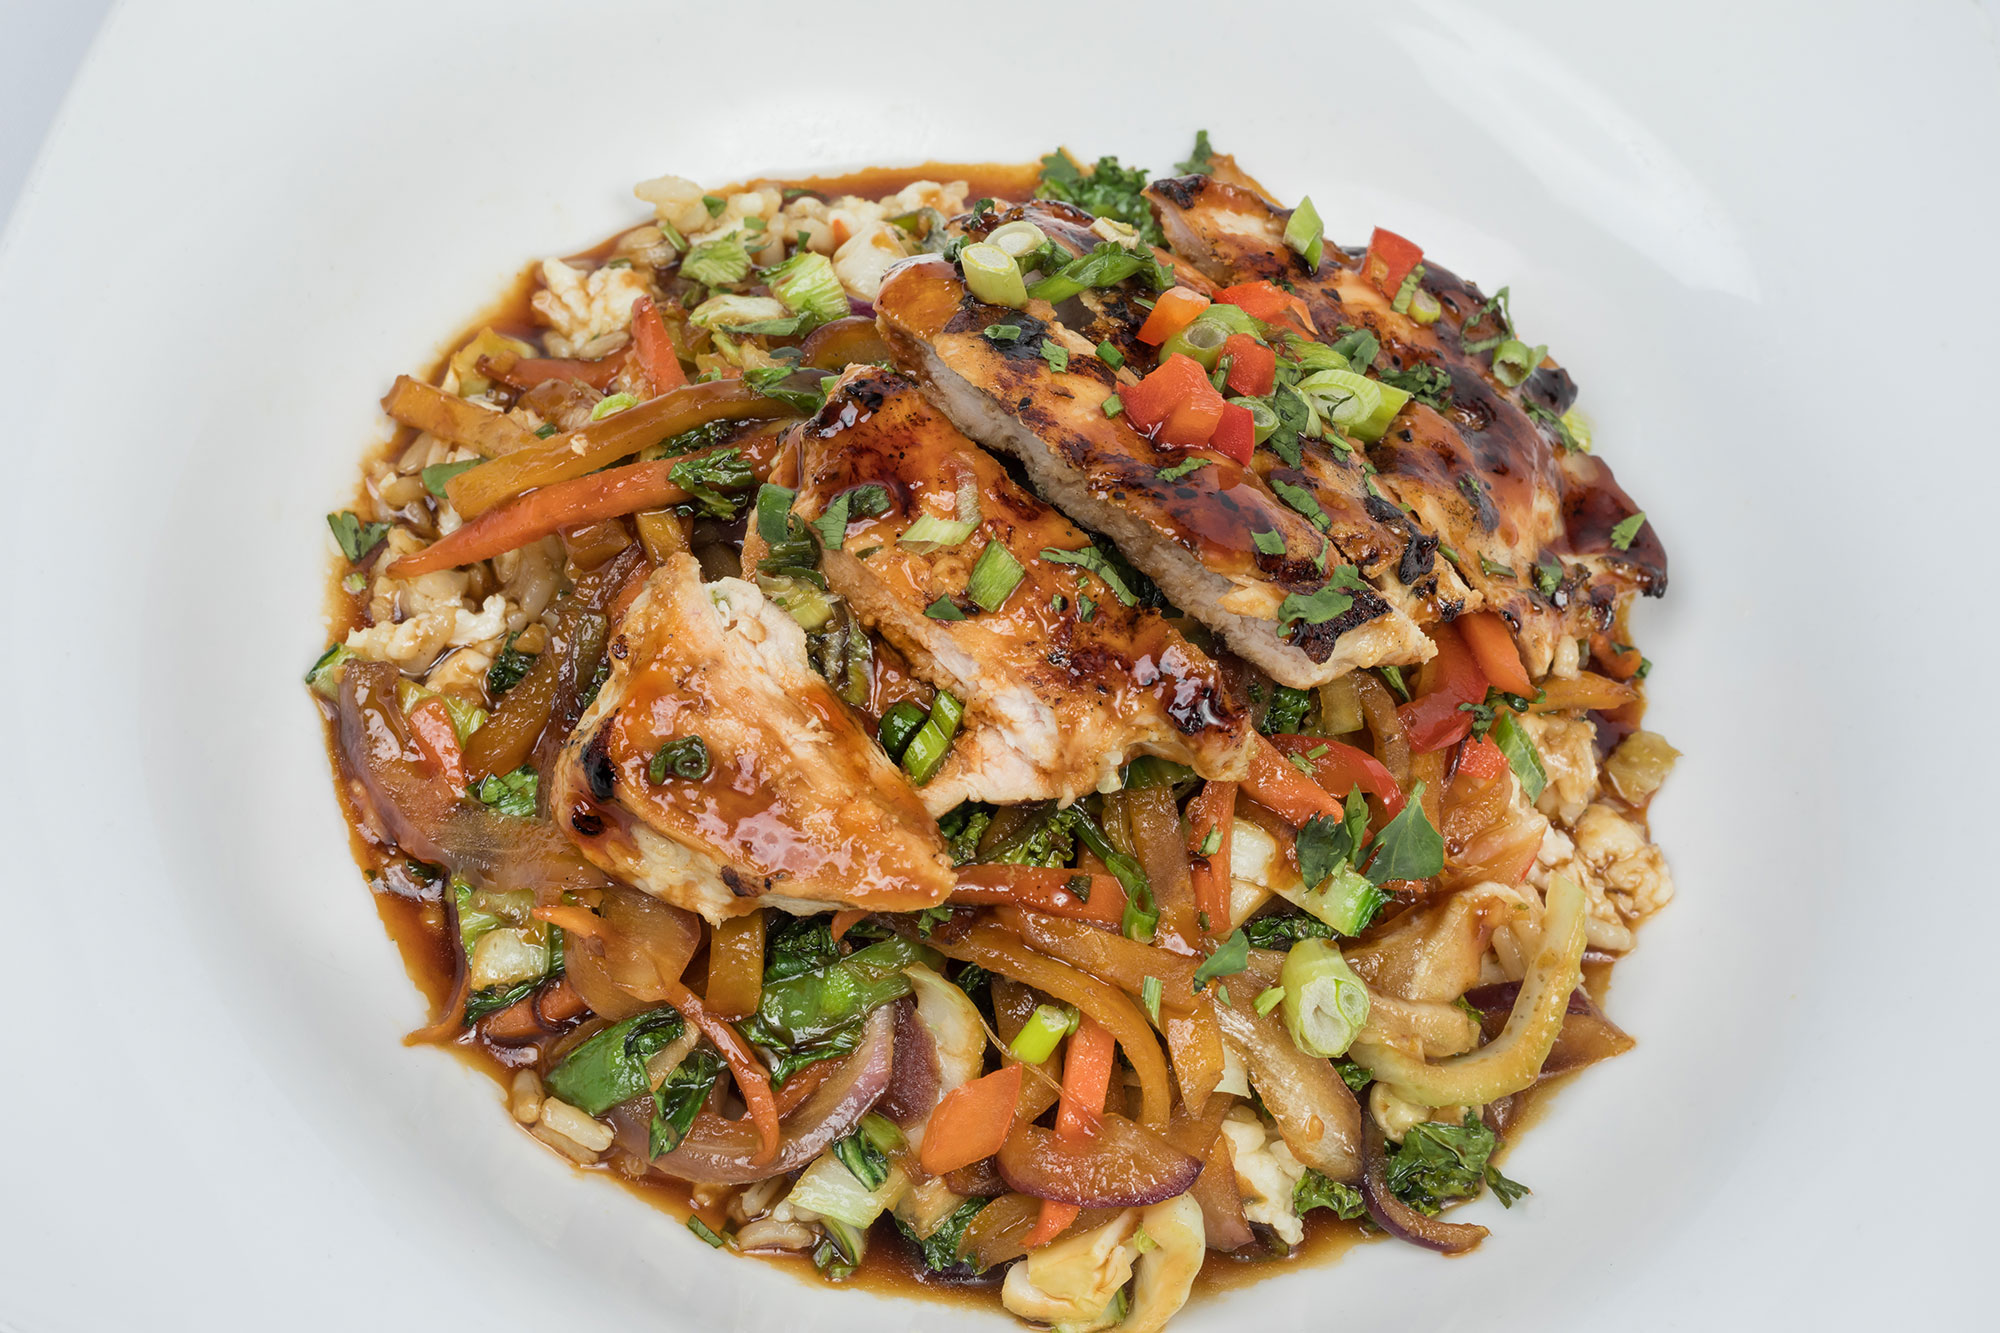 Grilled chicken stir fry from The Longwood Grille and Bar